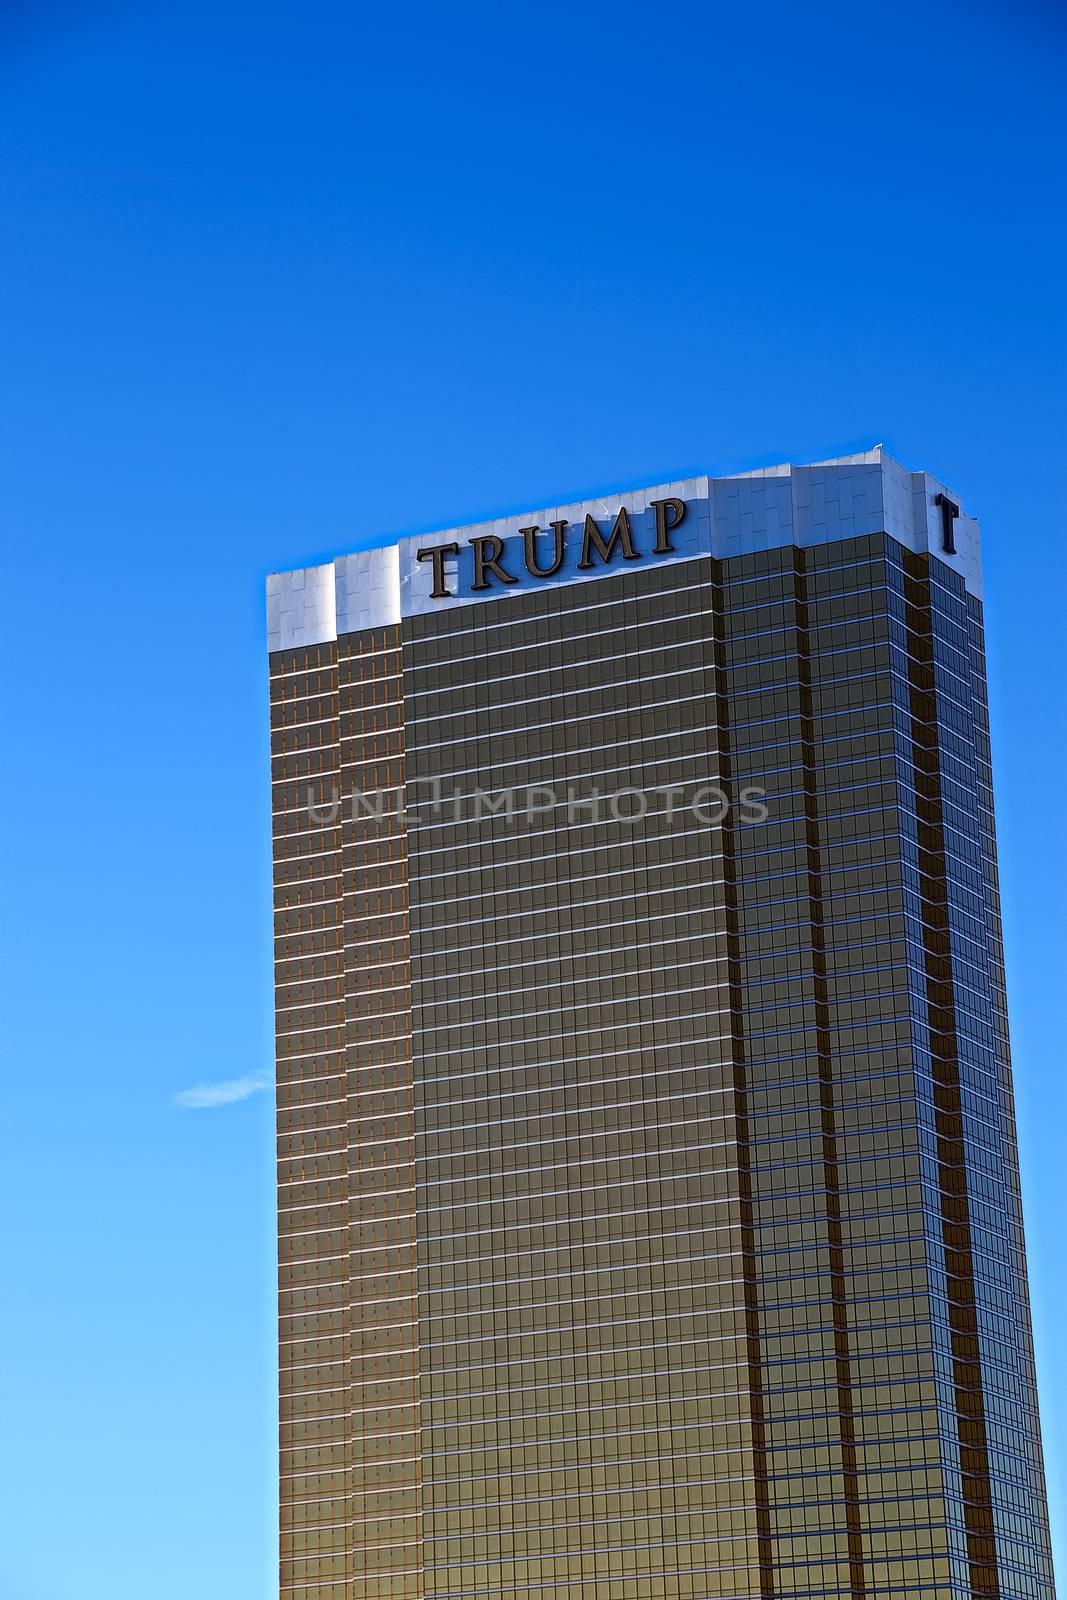 Las Vegas, USA - Sep 17, 2018: Trump International Hotel in Las Vegas, NV, named for real estate developer and politician Donald Trump. The luxury property's windows are gilded with 24-carat gold. by USA-TARO